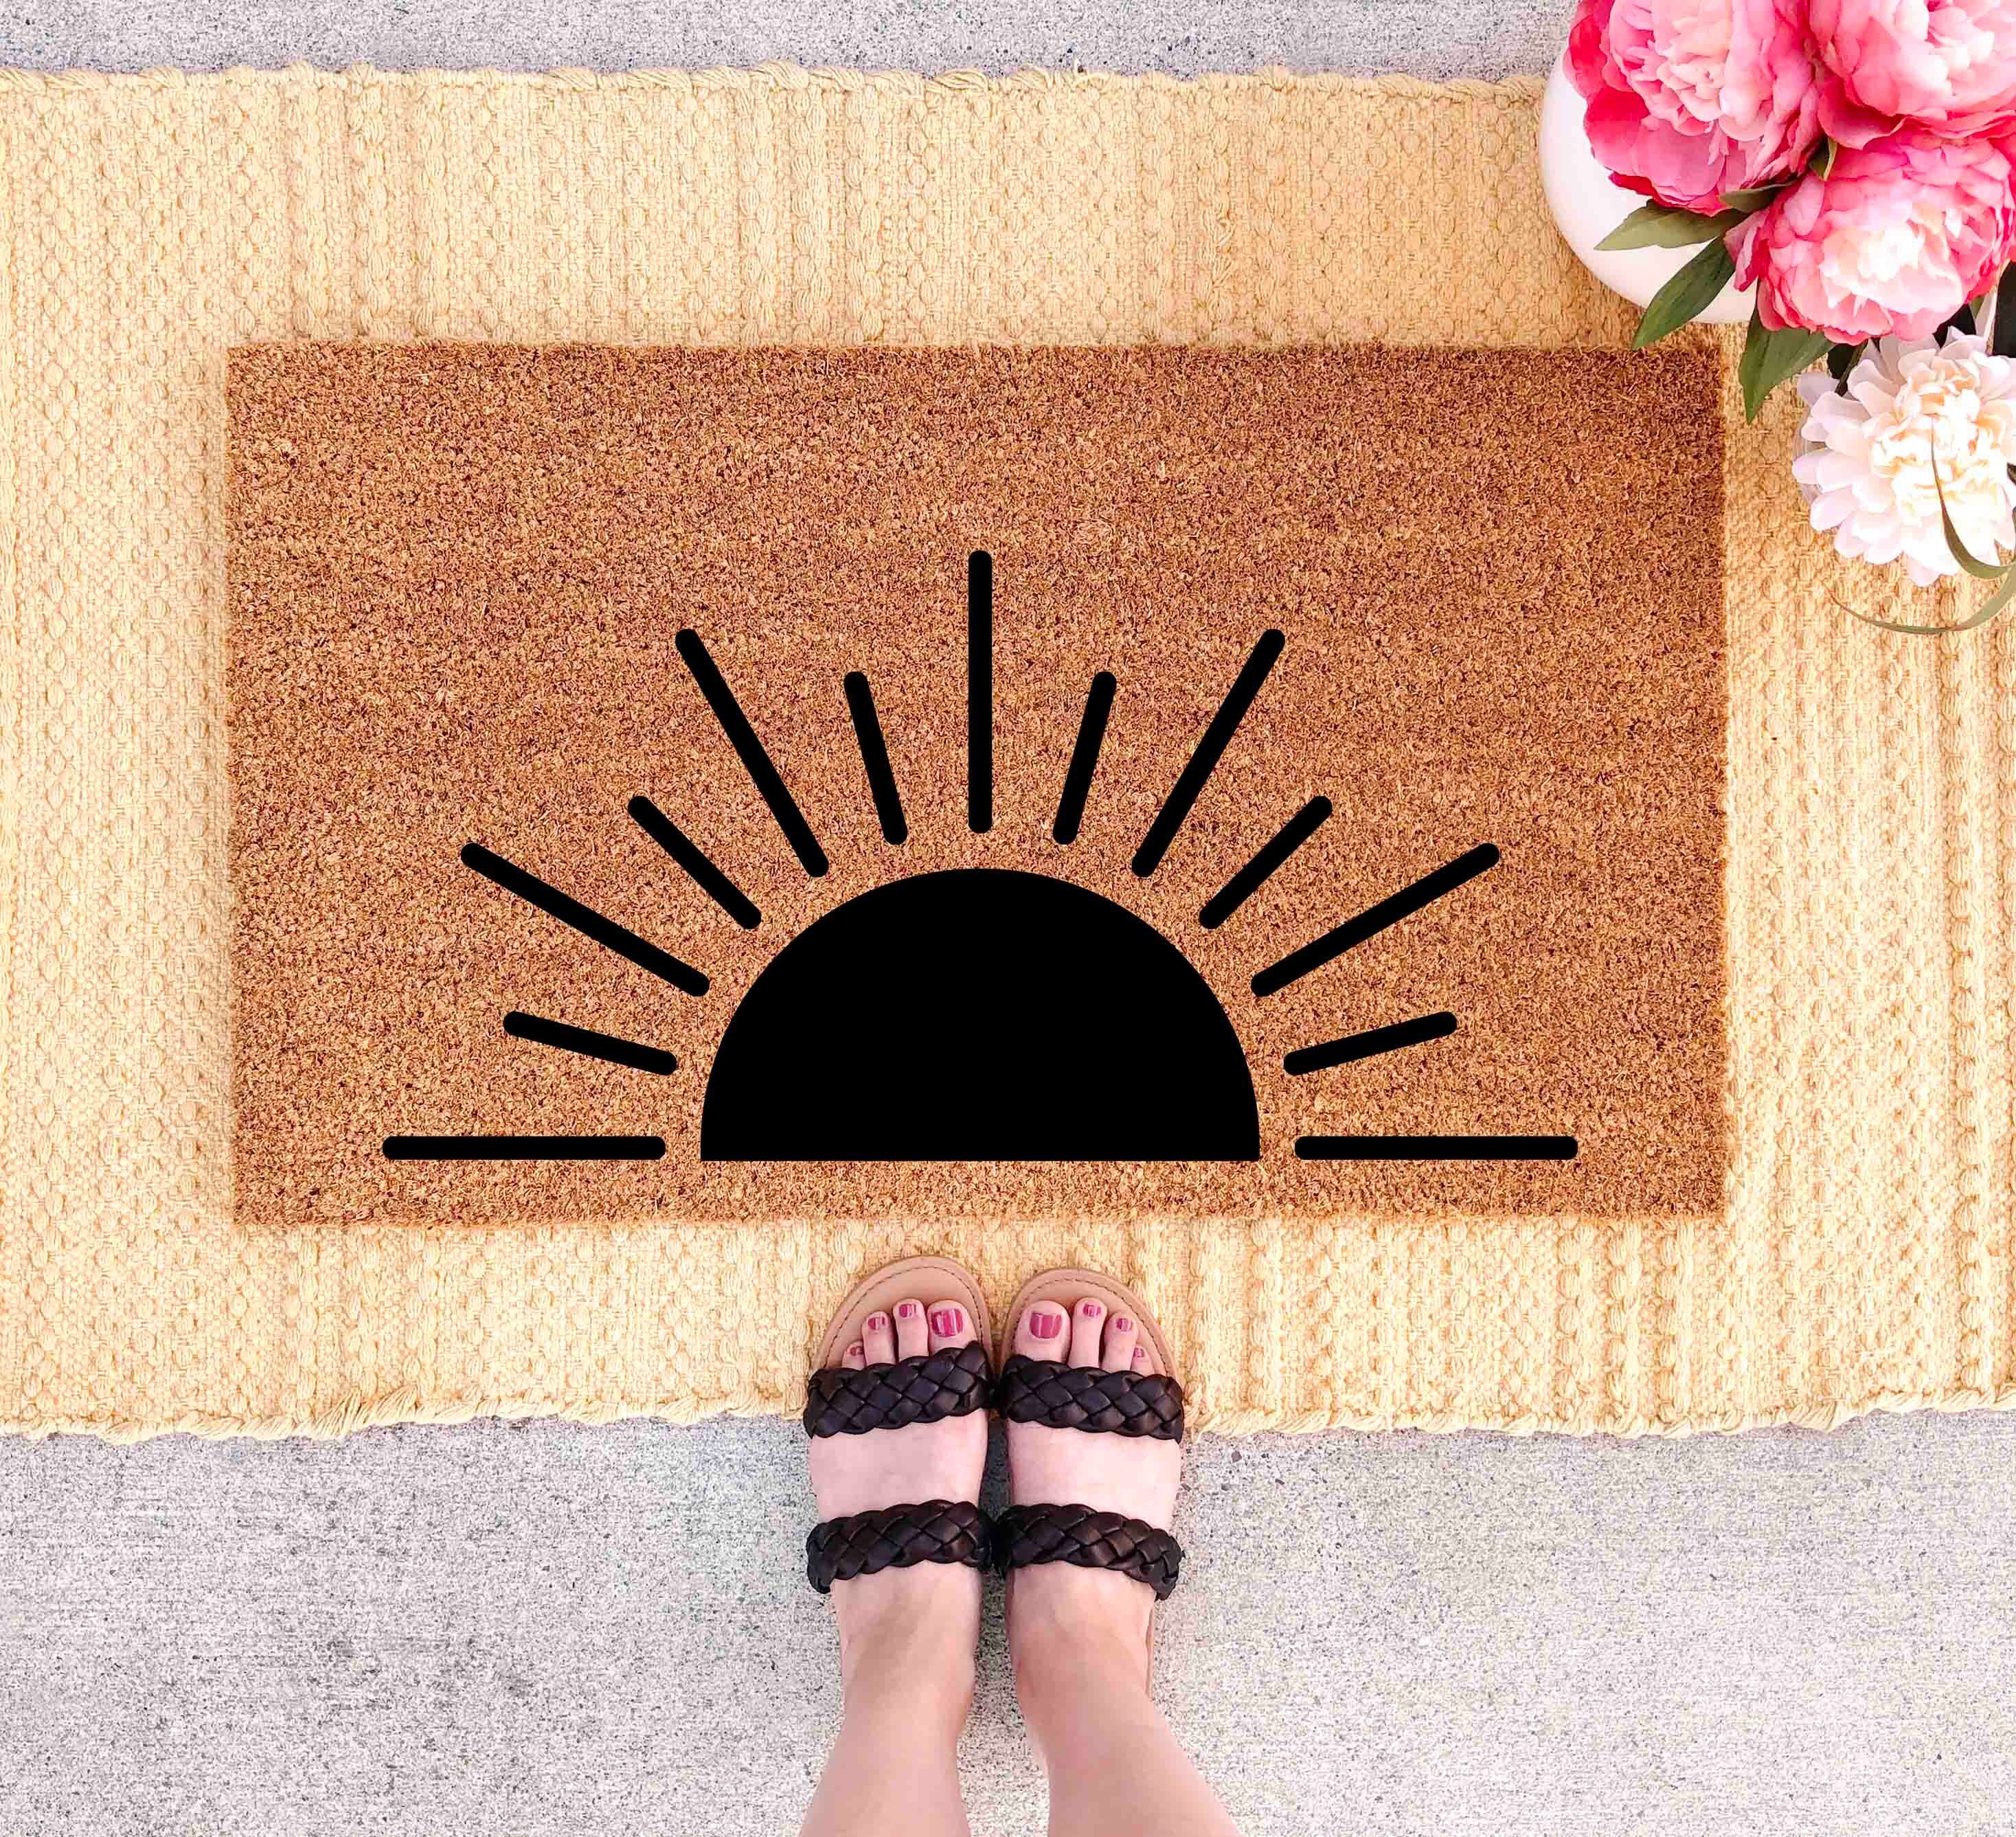 Brighten Your Home With A Boho Door Mat Rug: Decorative Floral Print,  Anti-slip, Perfect For Any Room! - Temu